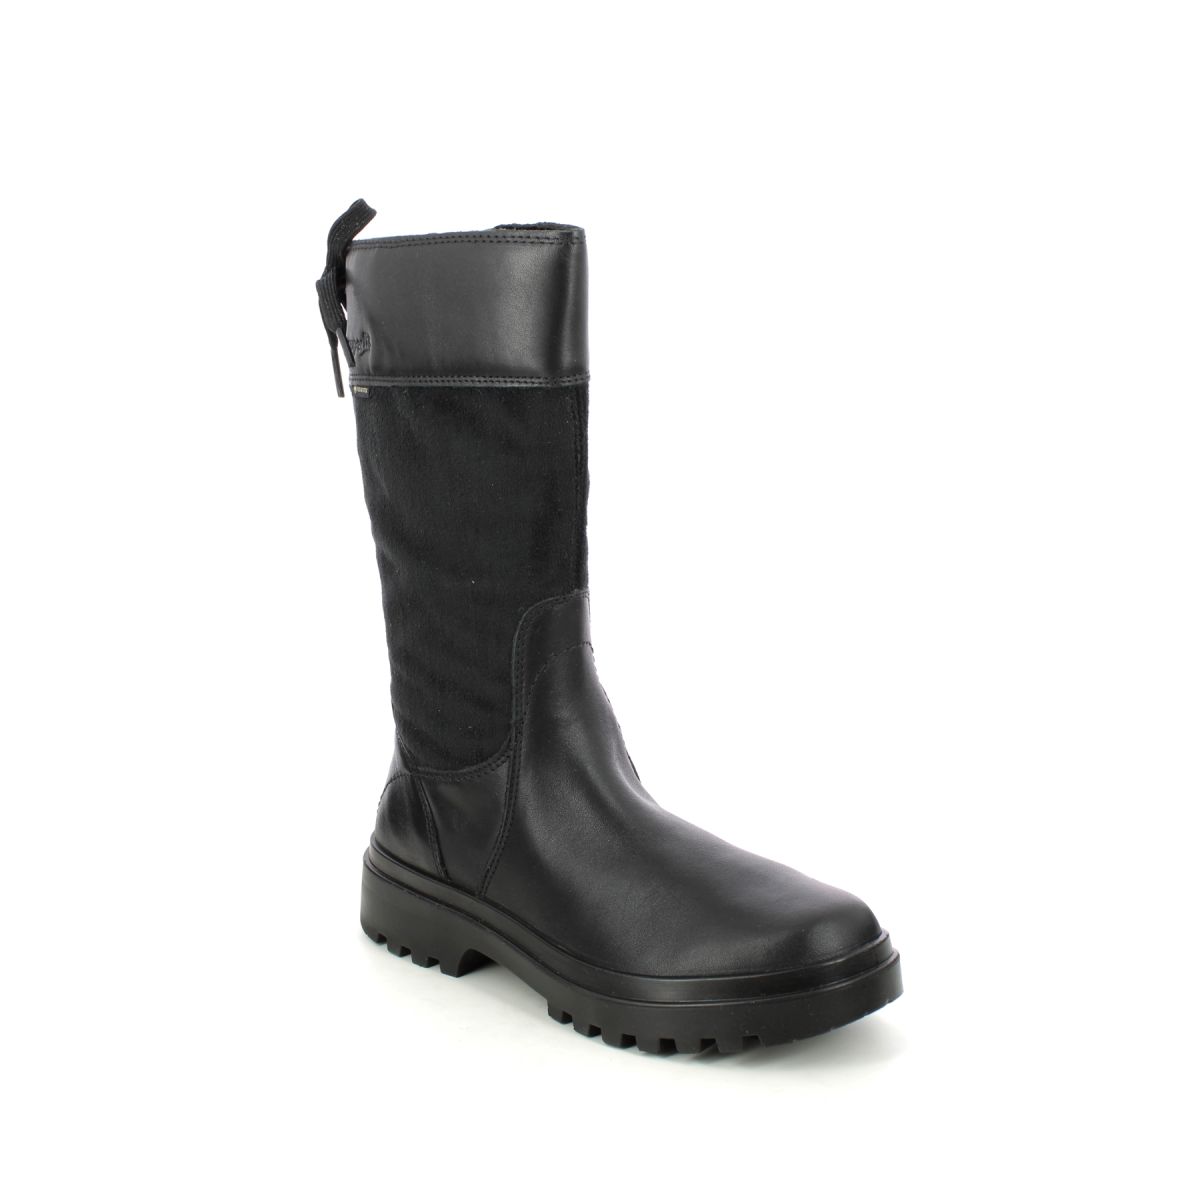 Superfit Abby Long Gtx Black Leather Kids Girls Boots 1000605-0000 In Size 32 In Plain Black Leather For kids